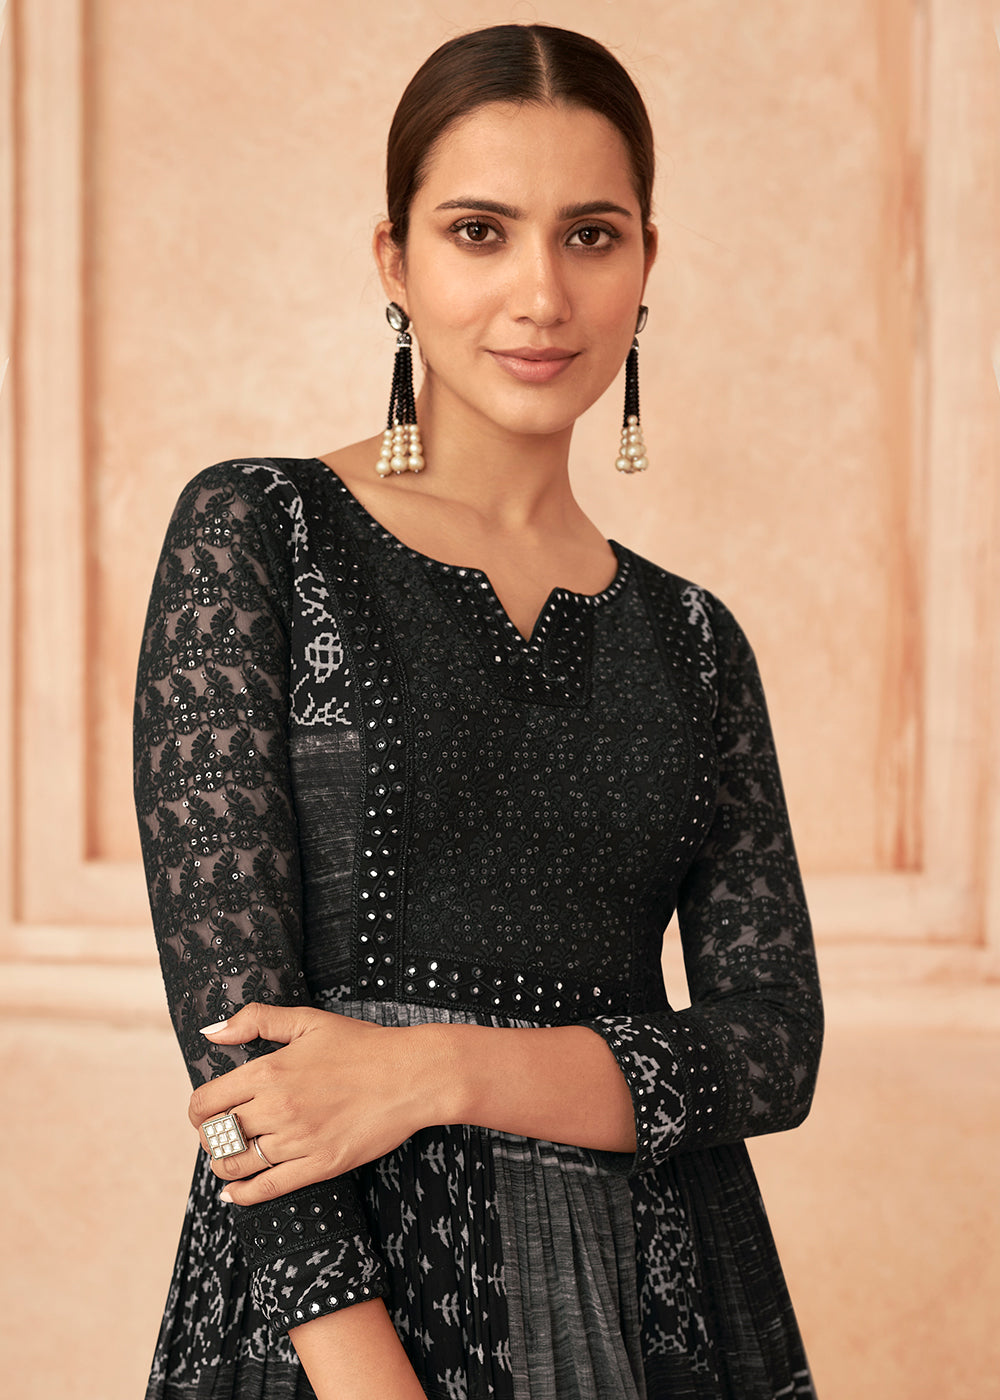 Buy Now Inventive Black Georgette Embroidered Wedding Wear Gown Online in USA, UK, Australia, New Zealand, Canada & Worldwide at Empress Clothing.